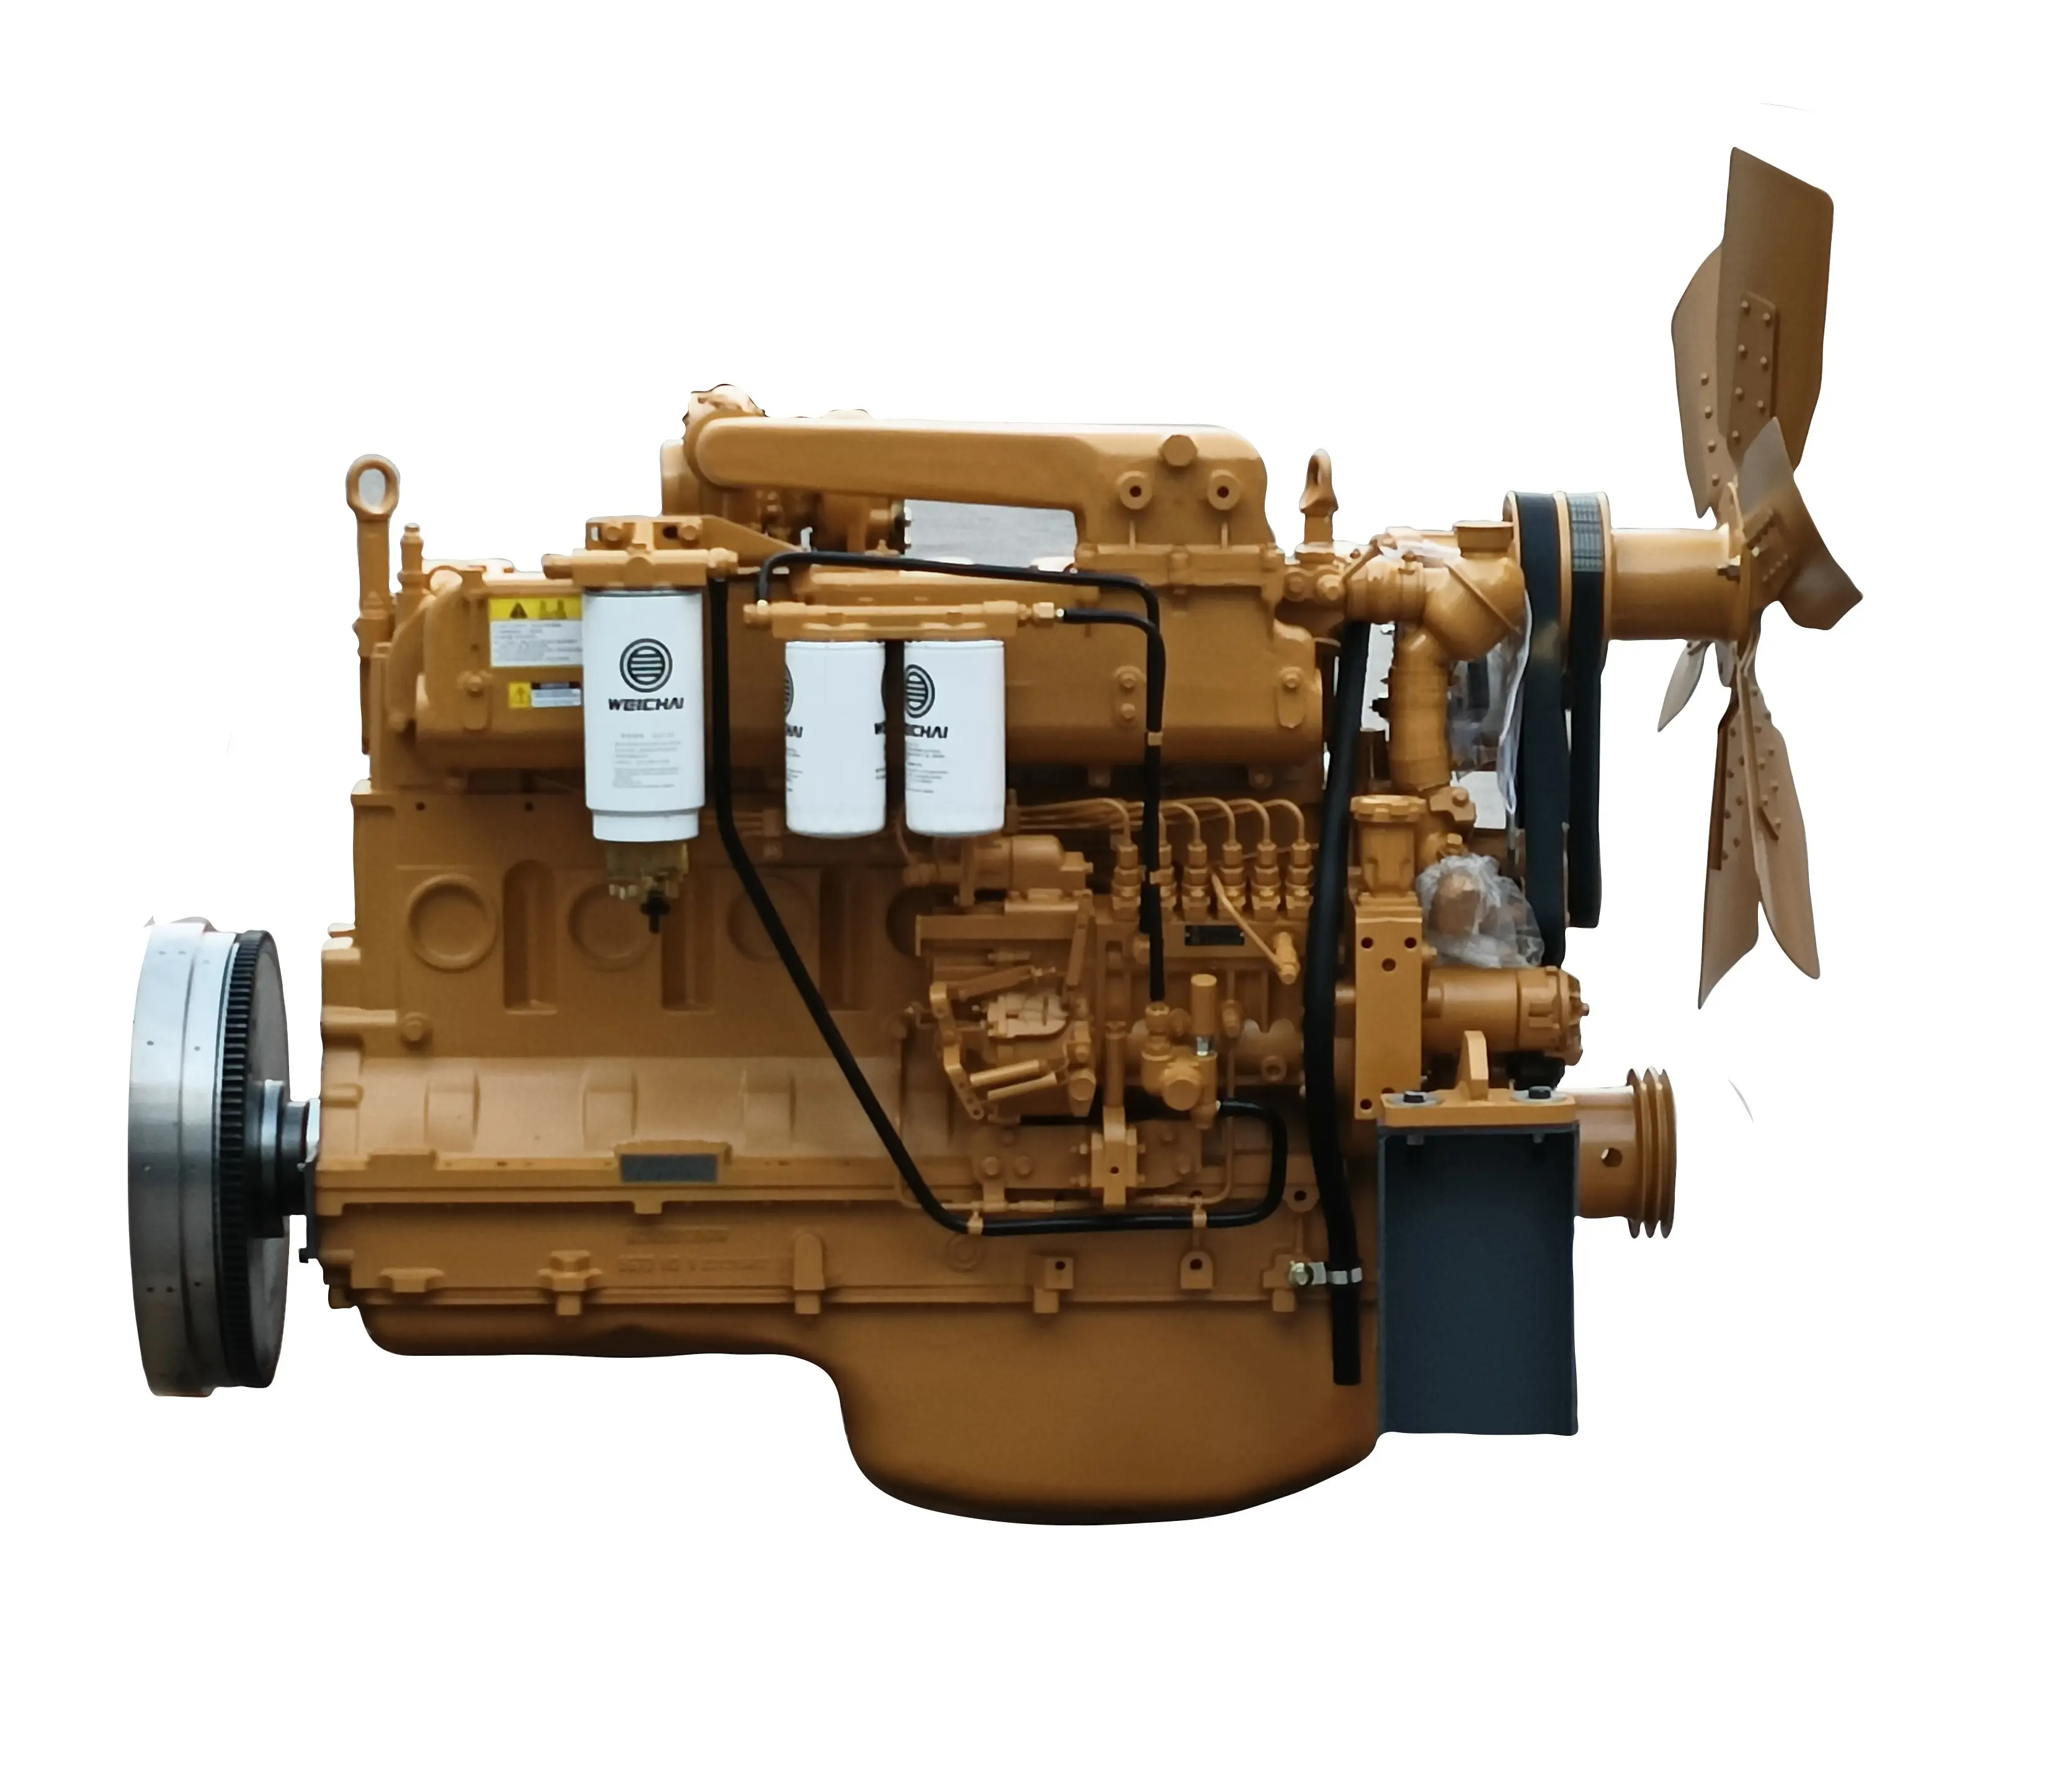 Hot sell WD10G178E25 Diesel Engine water cooled inline motor 131 kw/178 hp/1850 rpm for bulldozer